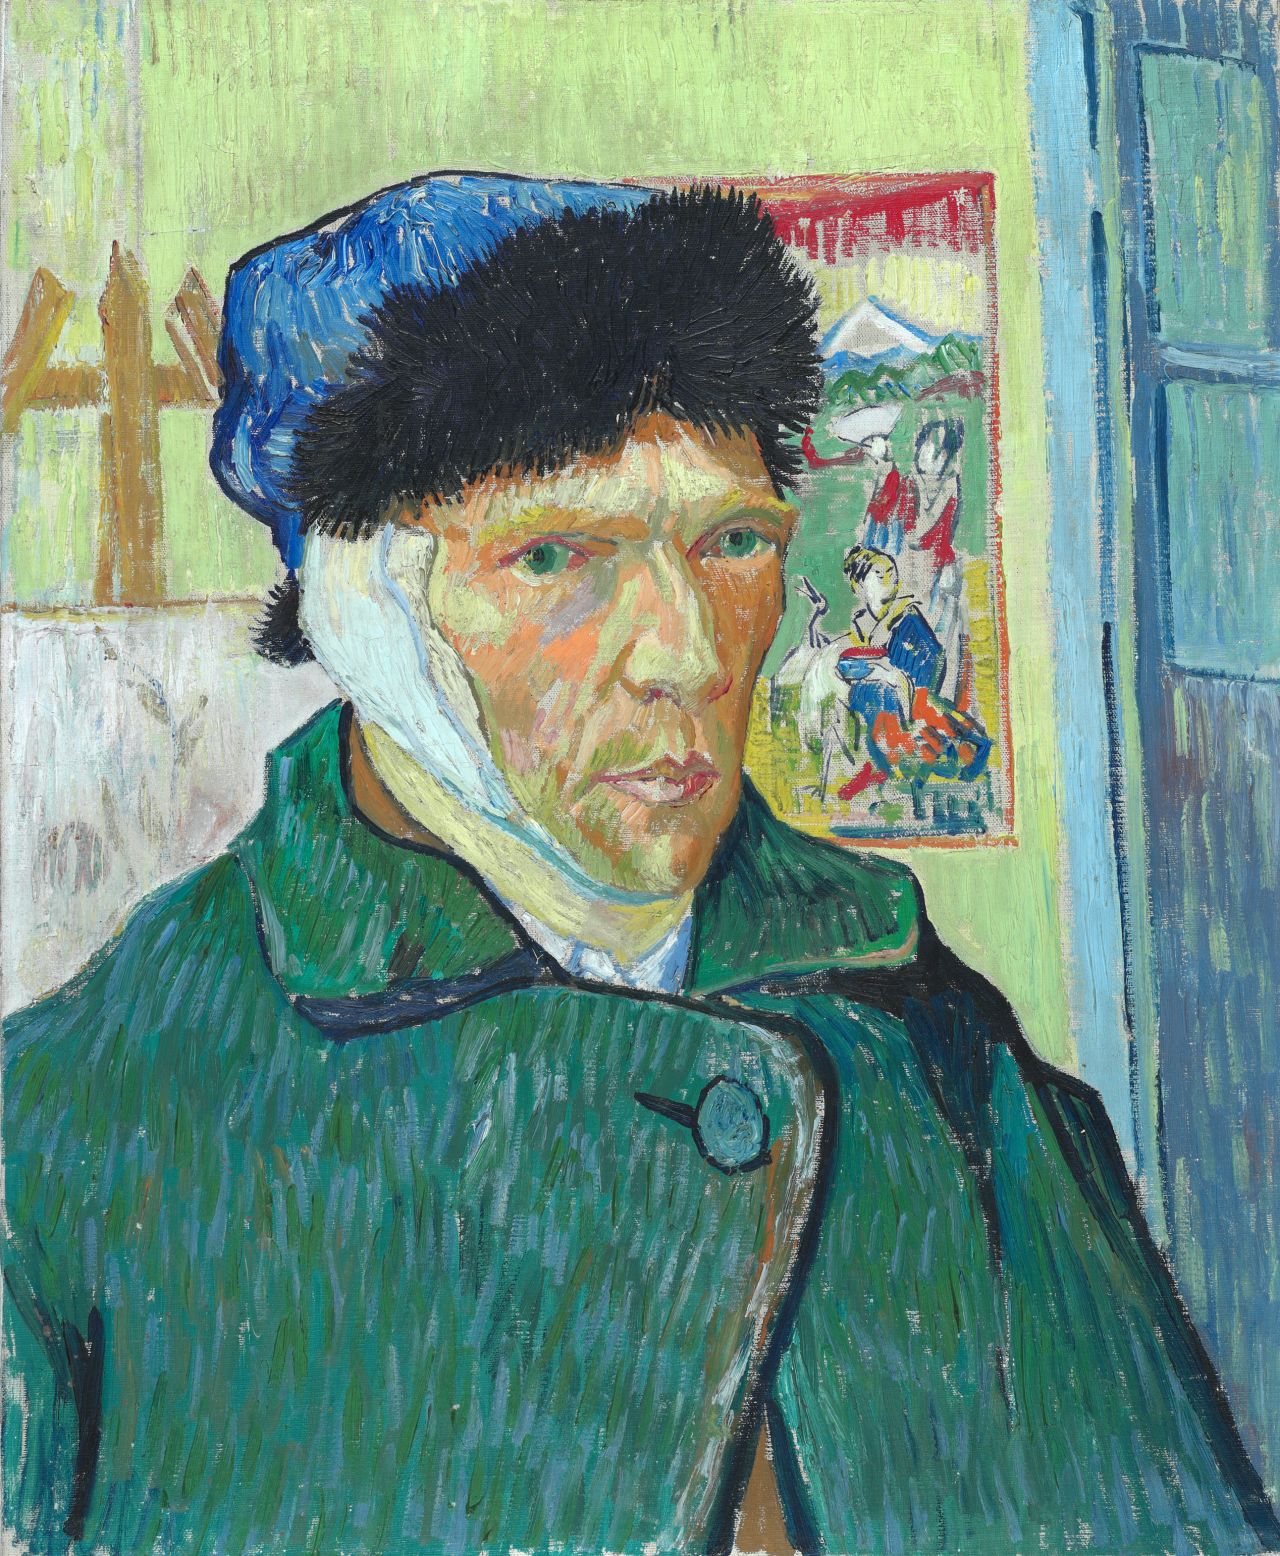 The Courtauld Gallery's collection includes impressionistic and post-impressionistic masterpieces, as well as works from the Middle Ages and Renaissance.<br />Shown here: Self-Portrait with Bandaged Ear, by Vincent Van Gogh. Courtesy The Samuel Courtauld Trust.